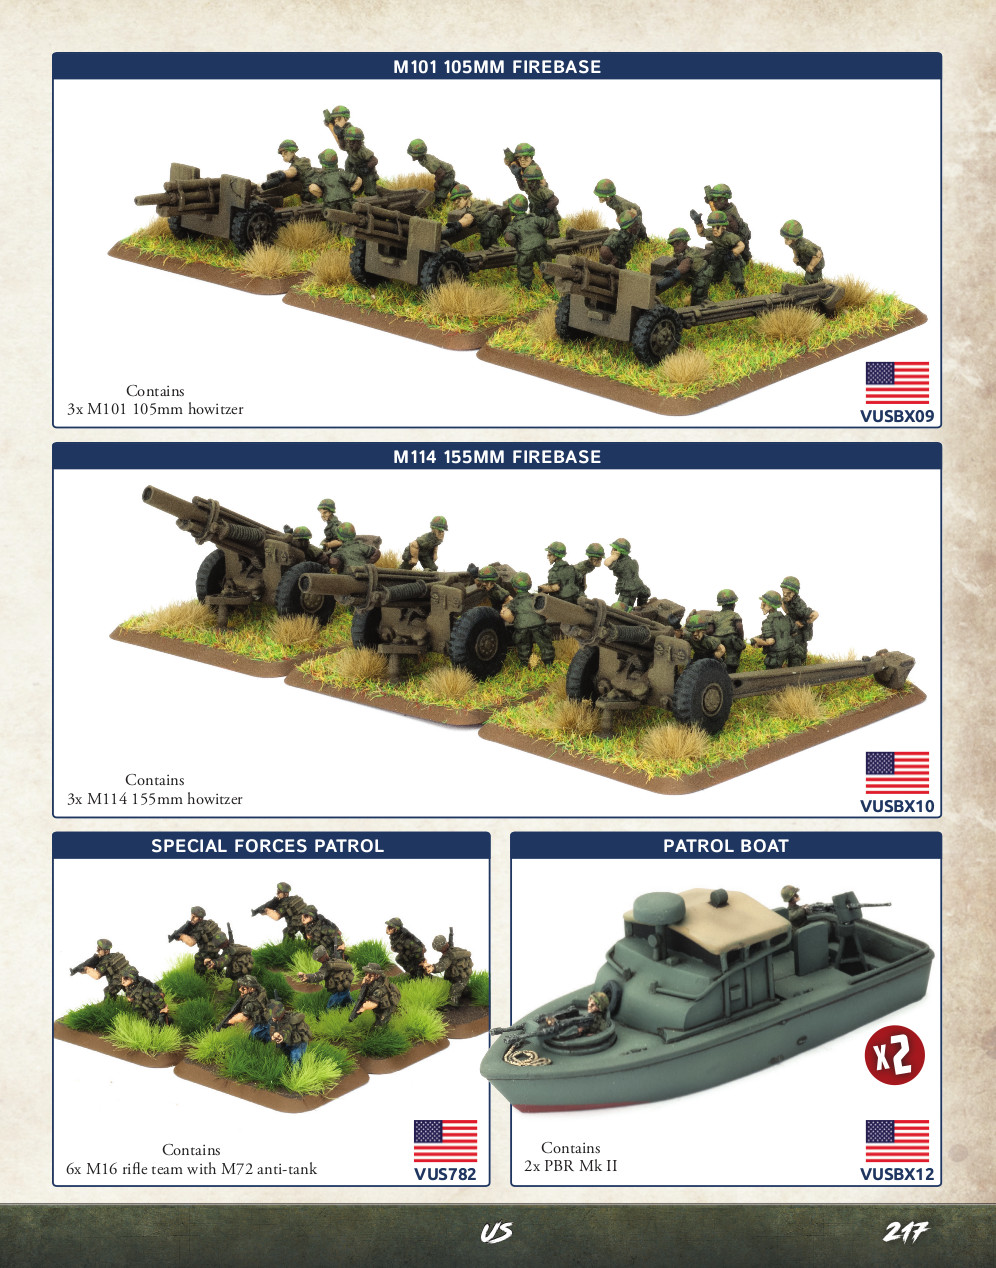 Miniatures Showcase from 'NAM Vietnam Rulebook by Osprey Games and Battlefront